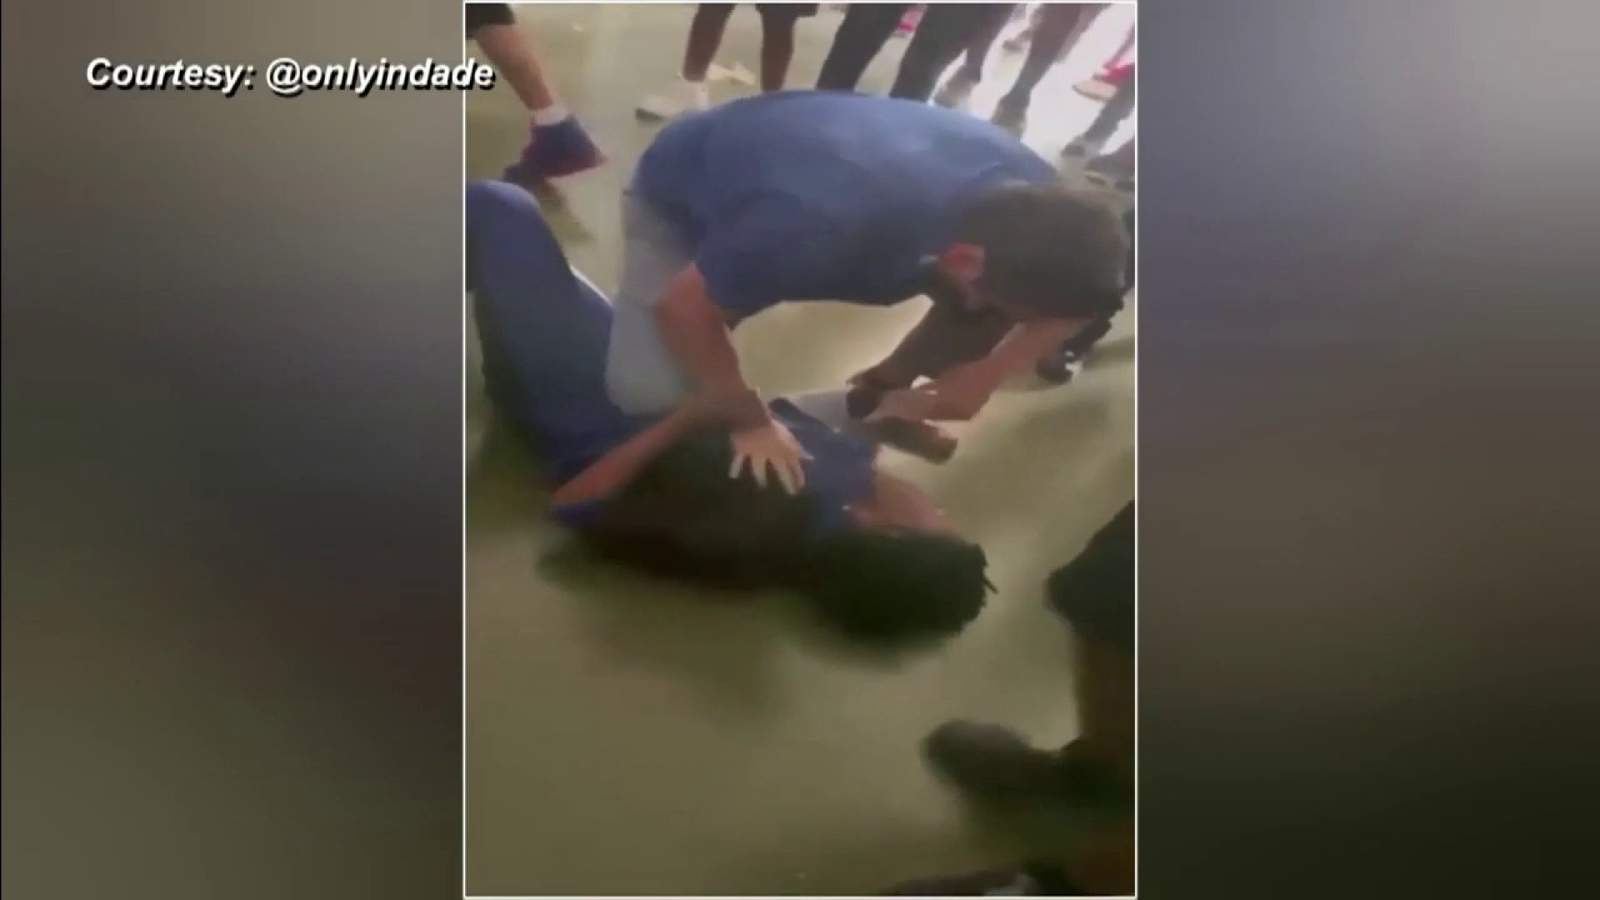 Video captures what appears to be teacher slamming student to the ground